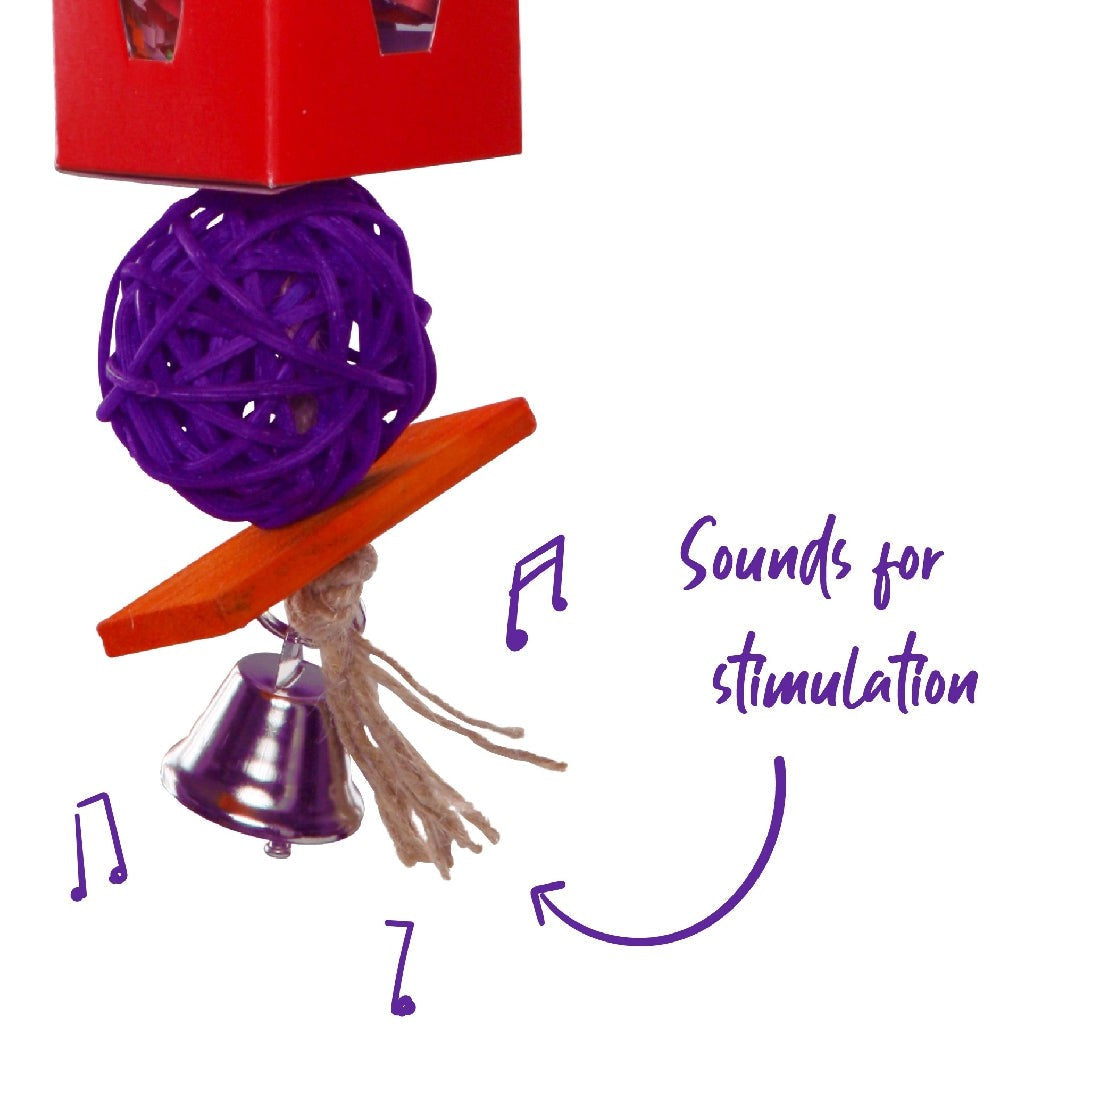 Creative bird toy with purple ball, bell, and sounds for stimulation.